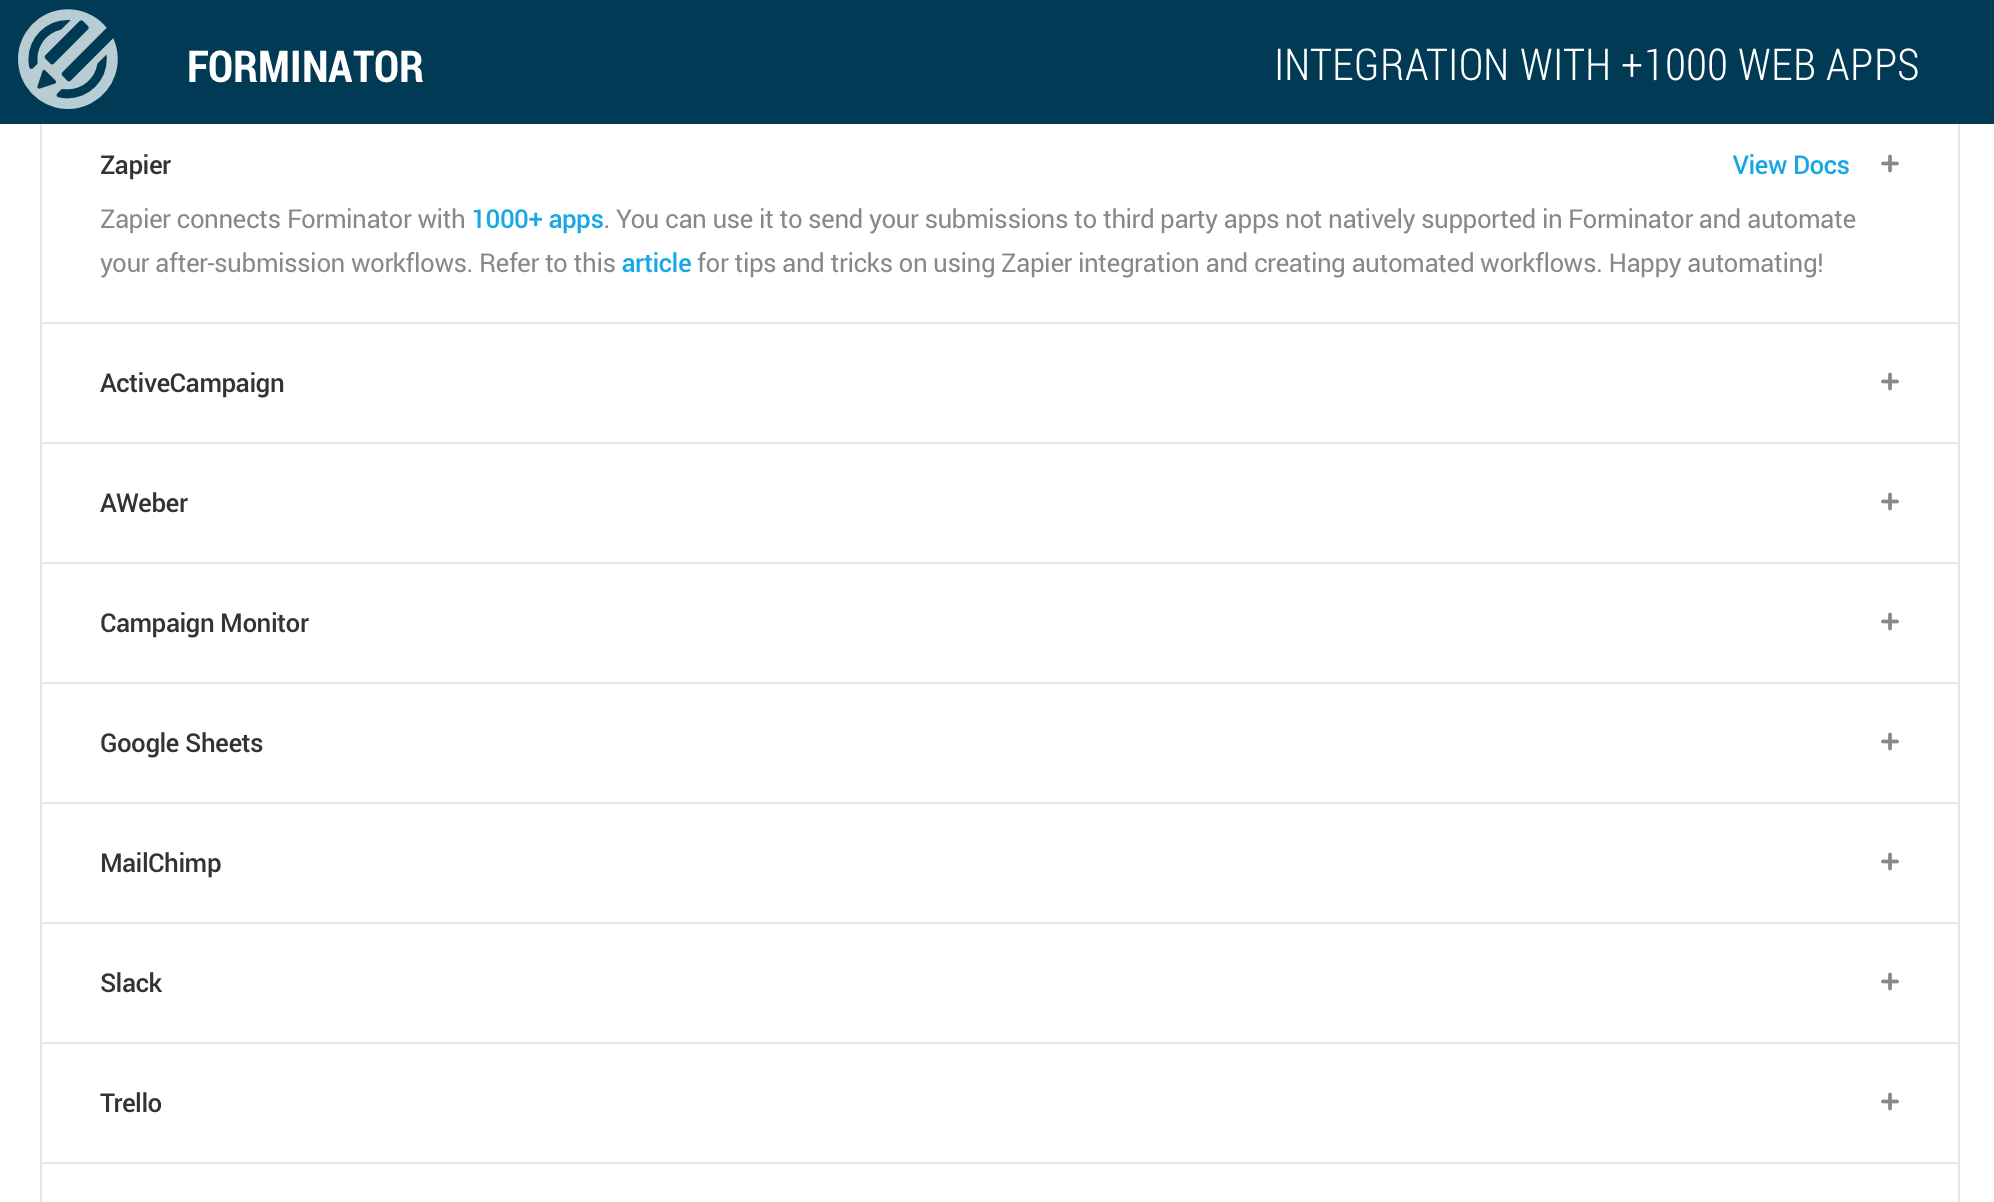 All your favorite integrations built-in.